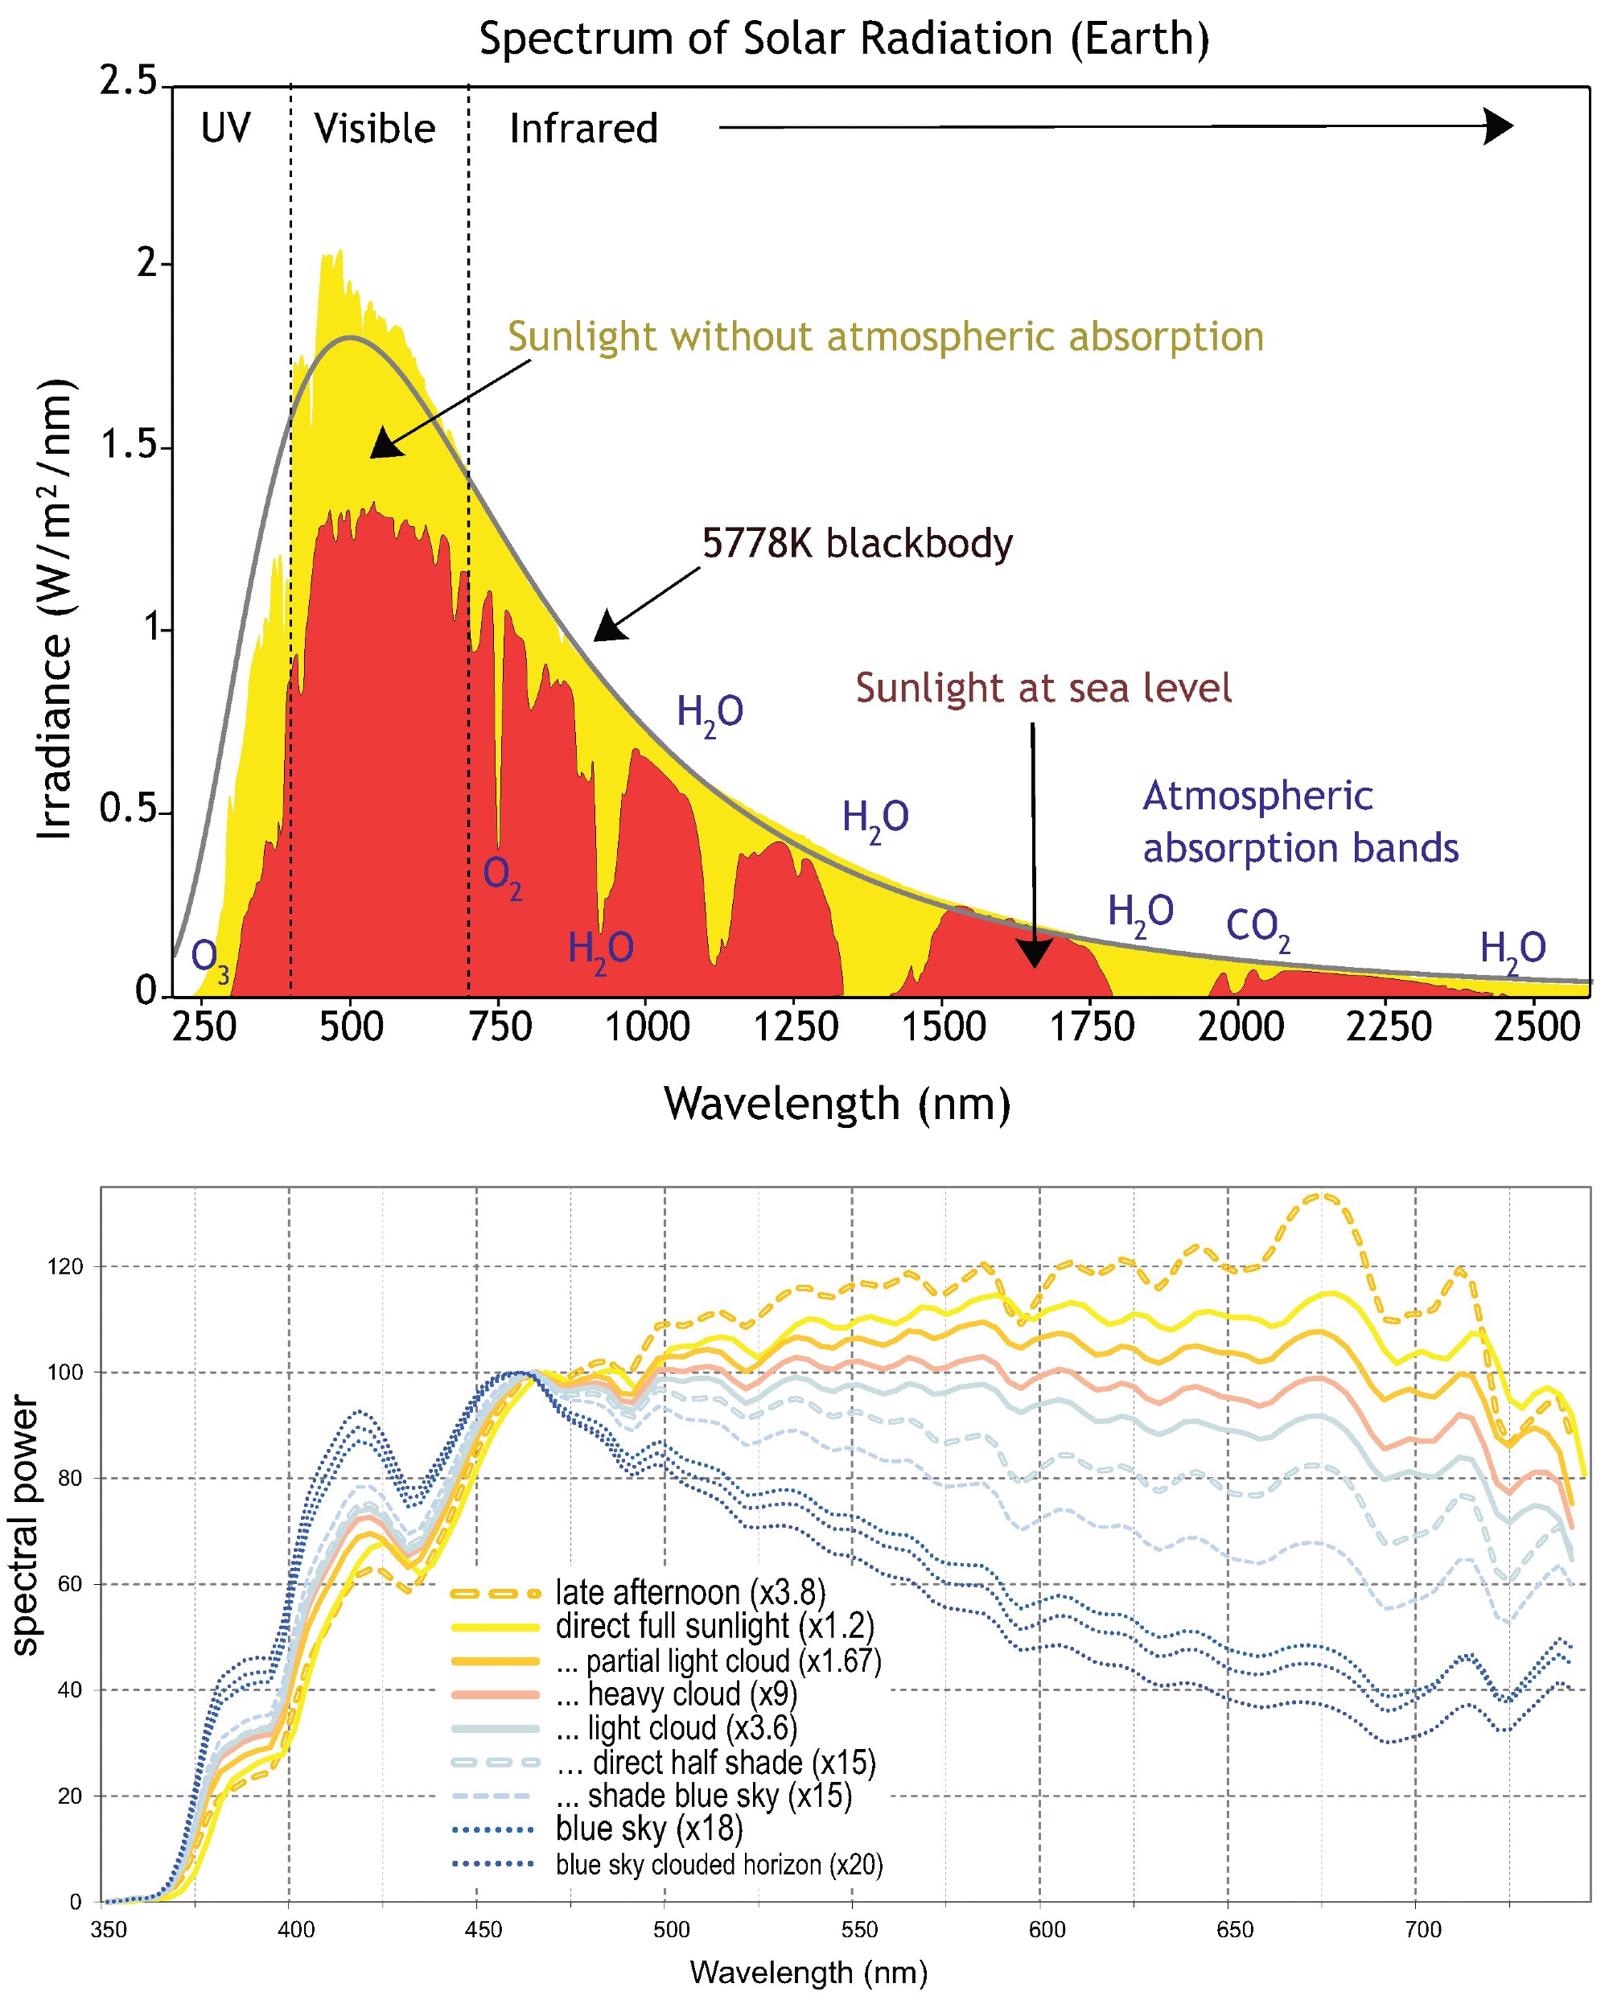 Sunlight spectrum at sea level versus the full radiation above the atmosphere (upper panel). Proportion of dispersion for additional damping of sunlight by atmospheric illumination conditions (lower panel).